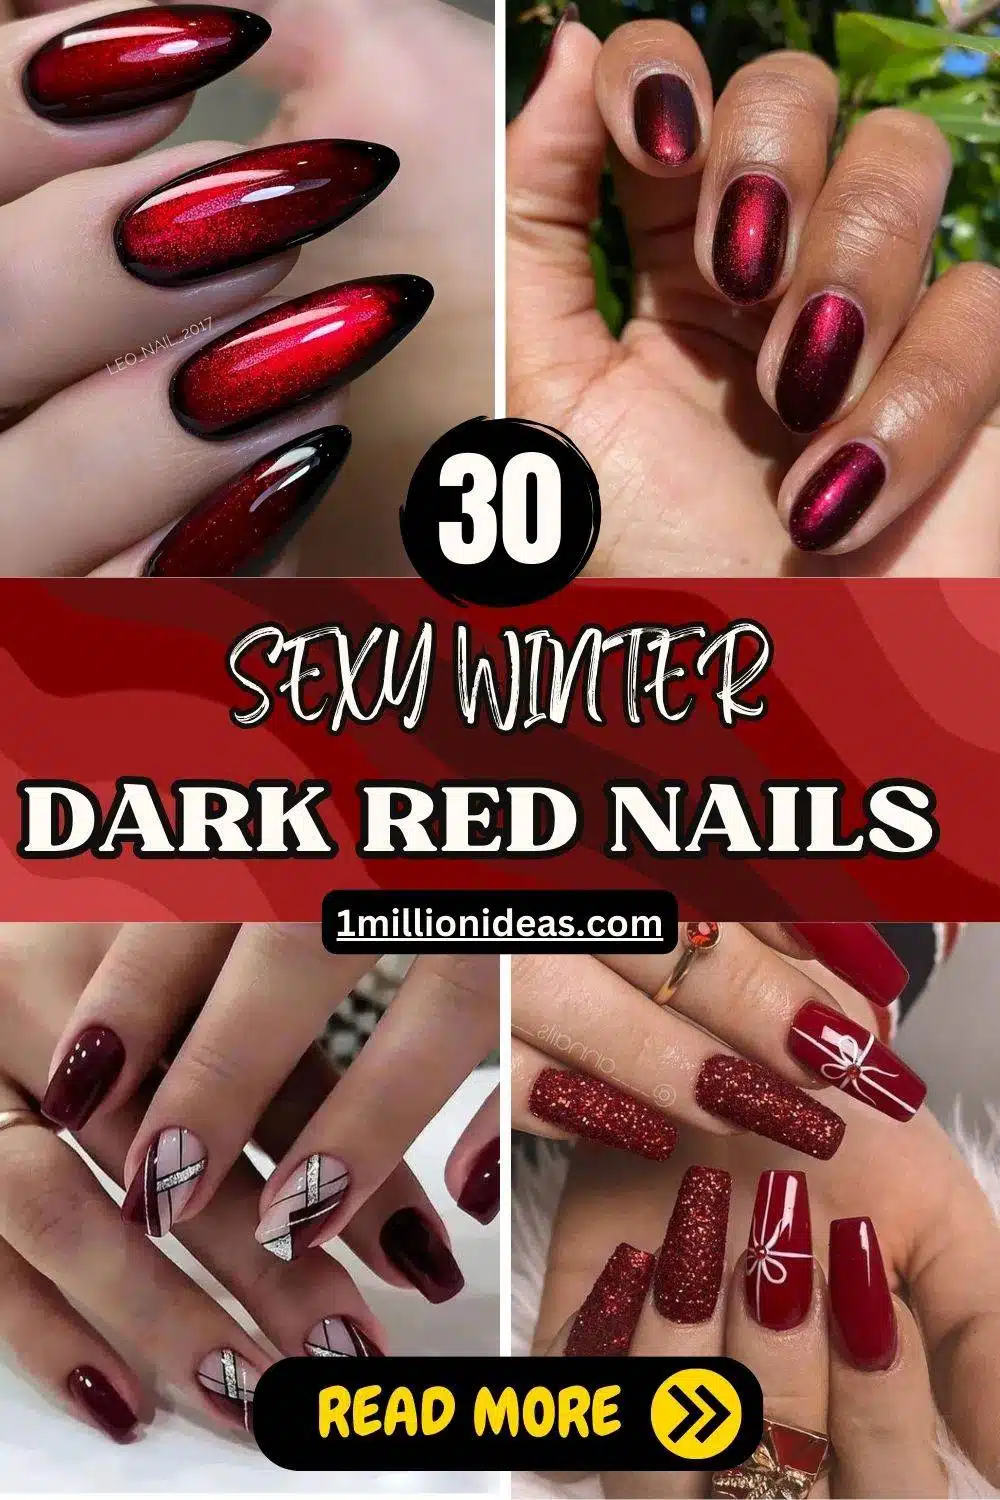 30 Sexy Dark Red Nails Perfect For Winter - 37